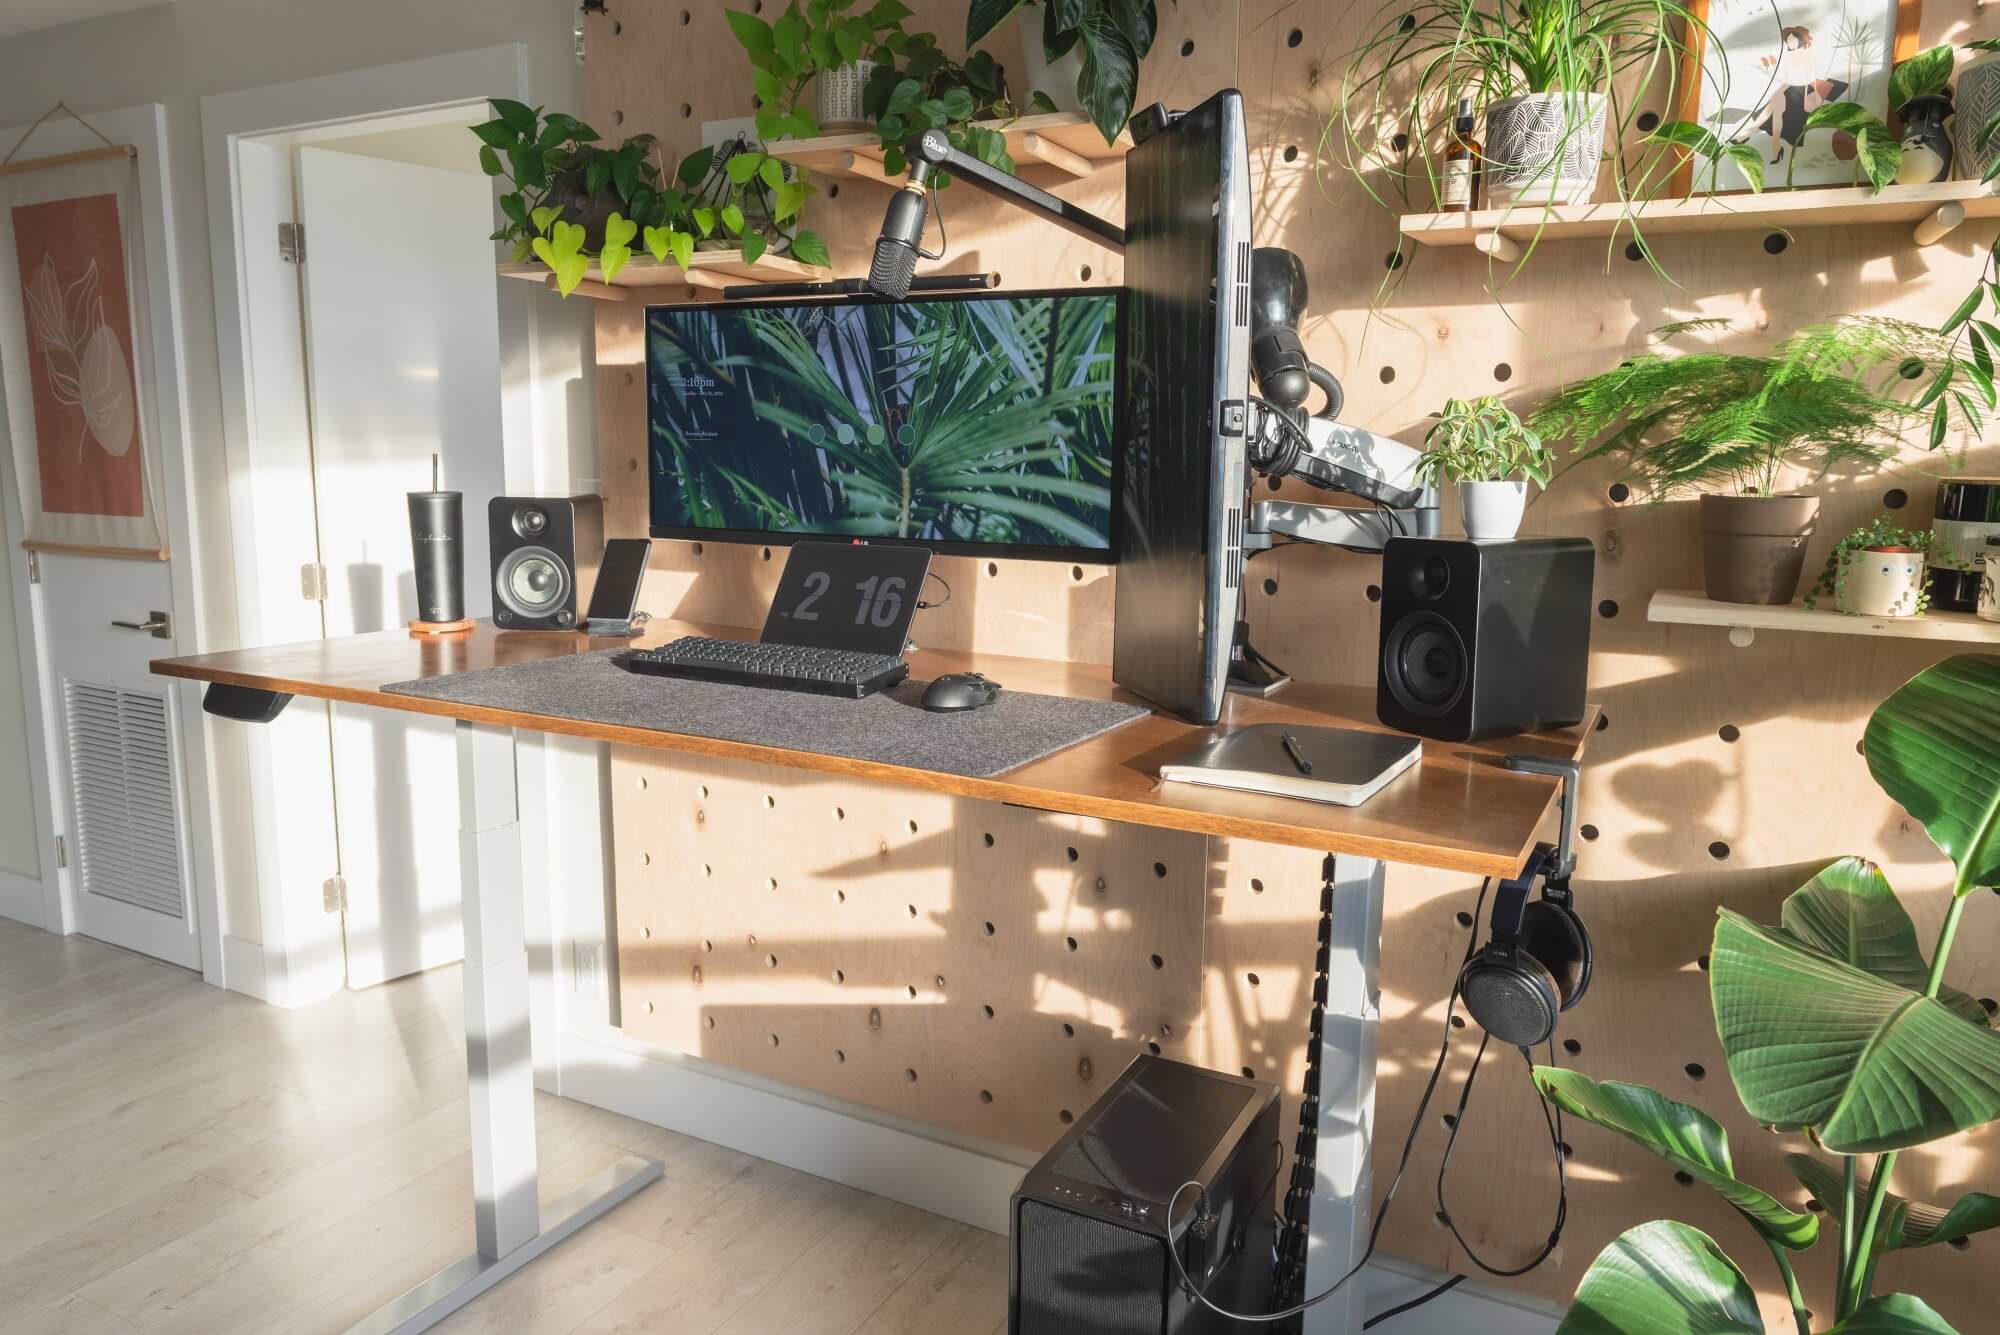 The green workspace featuring a giant pegboard